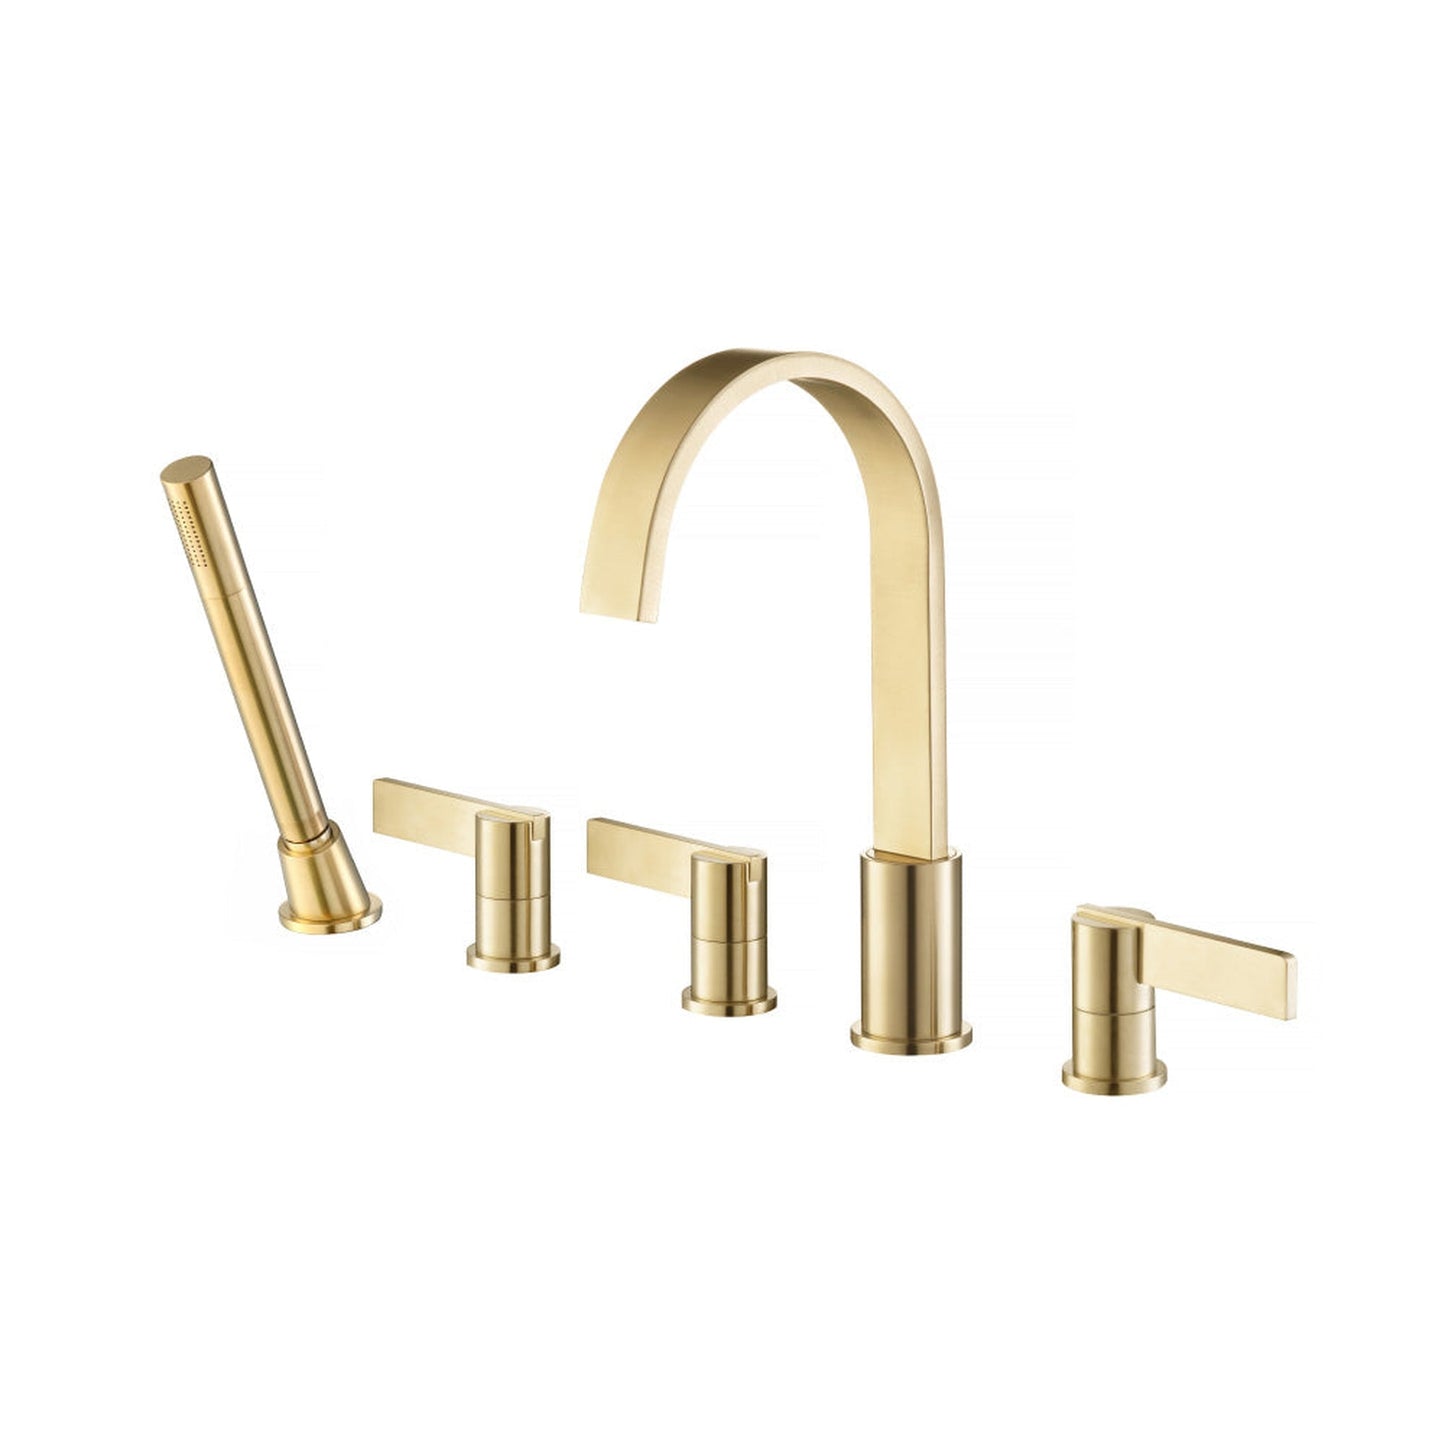 Isenberg Serie 145 Five Hole Deck Mounted Roman Tub Faucet With Hand Shower in Satin Brass